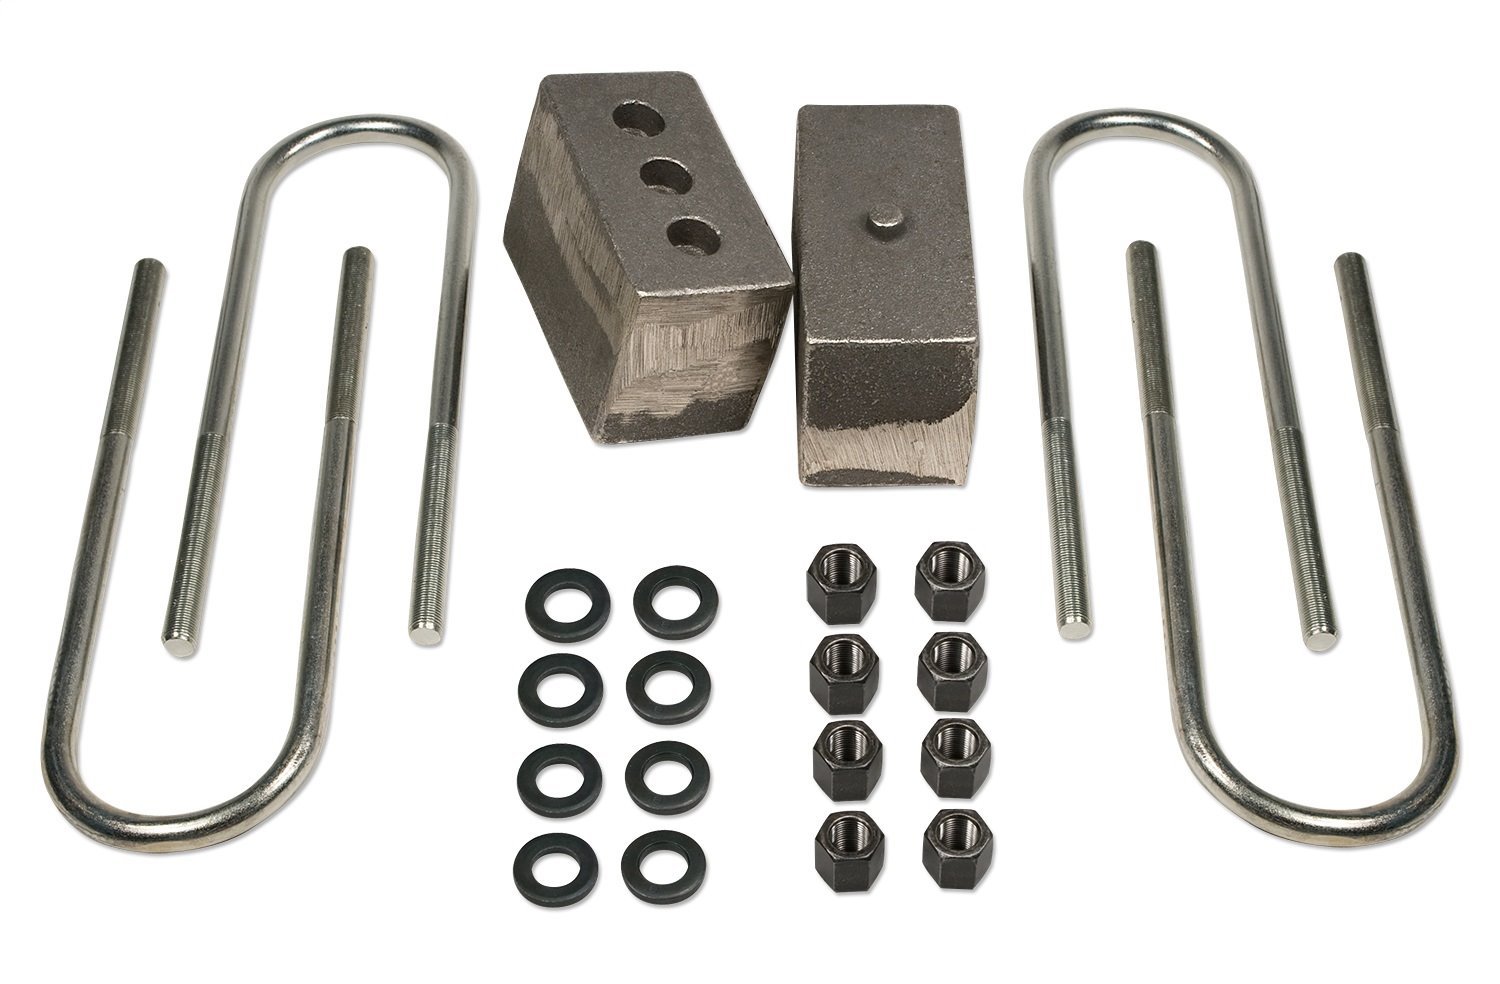 Axle Lift Blocks Kit 4 in. H x 3 in. W x 5.75 in. L Tapered For Vehicles w/4 in. Rear Axle Tube Dual Pinned Incl. U-Bolts